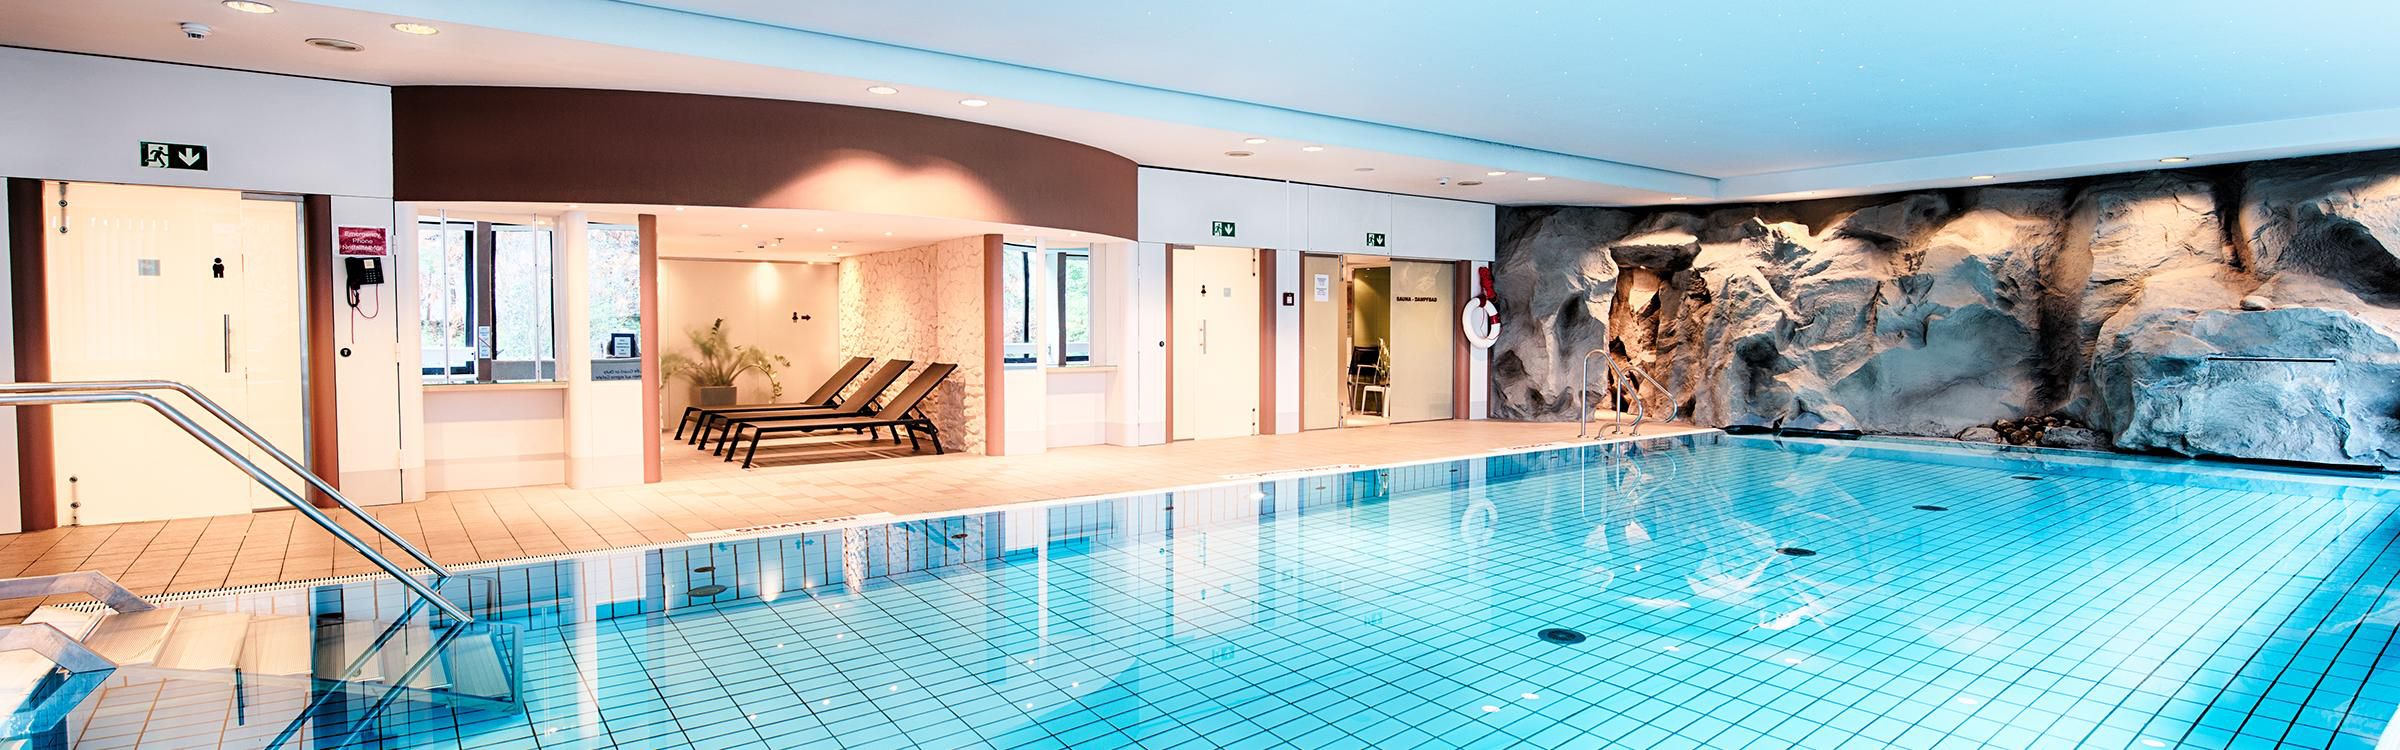 Swim a few lenghts in our pool to stay active during your stay